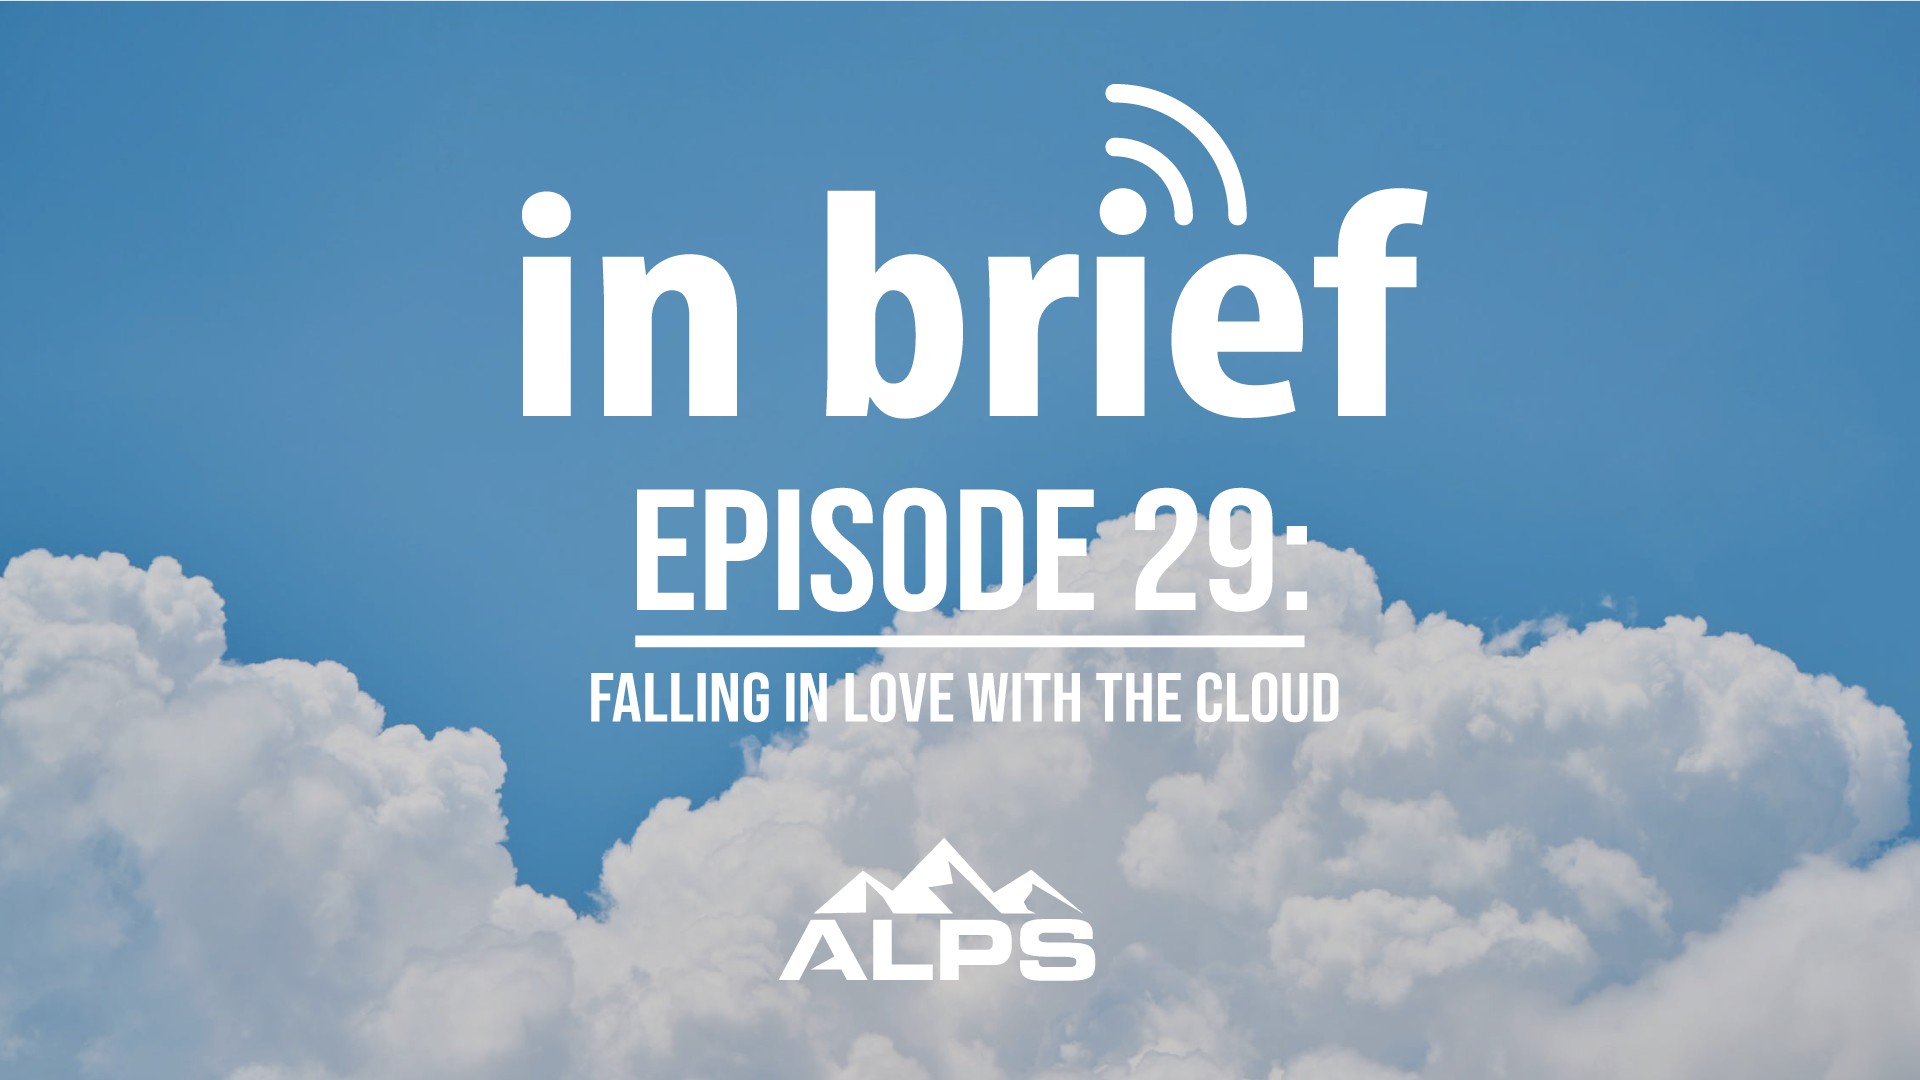 ALPS In Brief Podcast — Episode 29: Falling in Love with the Cloud